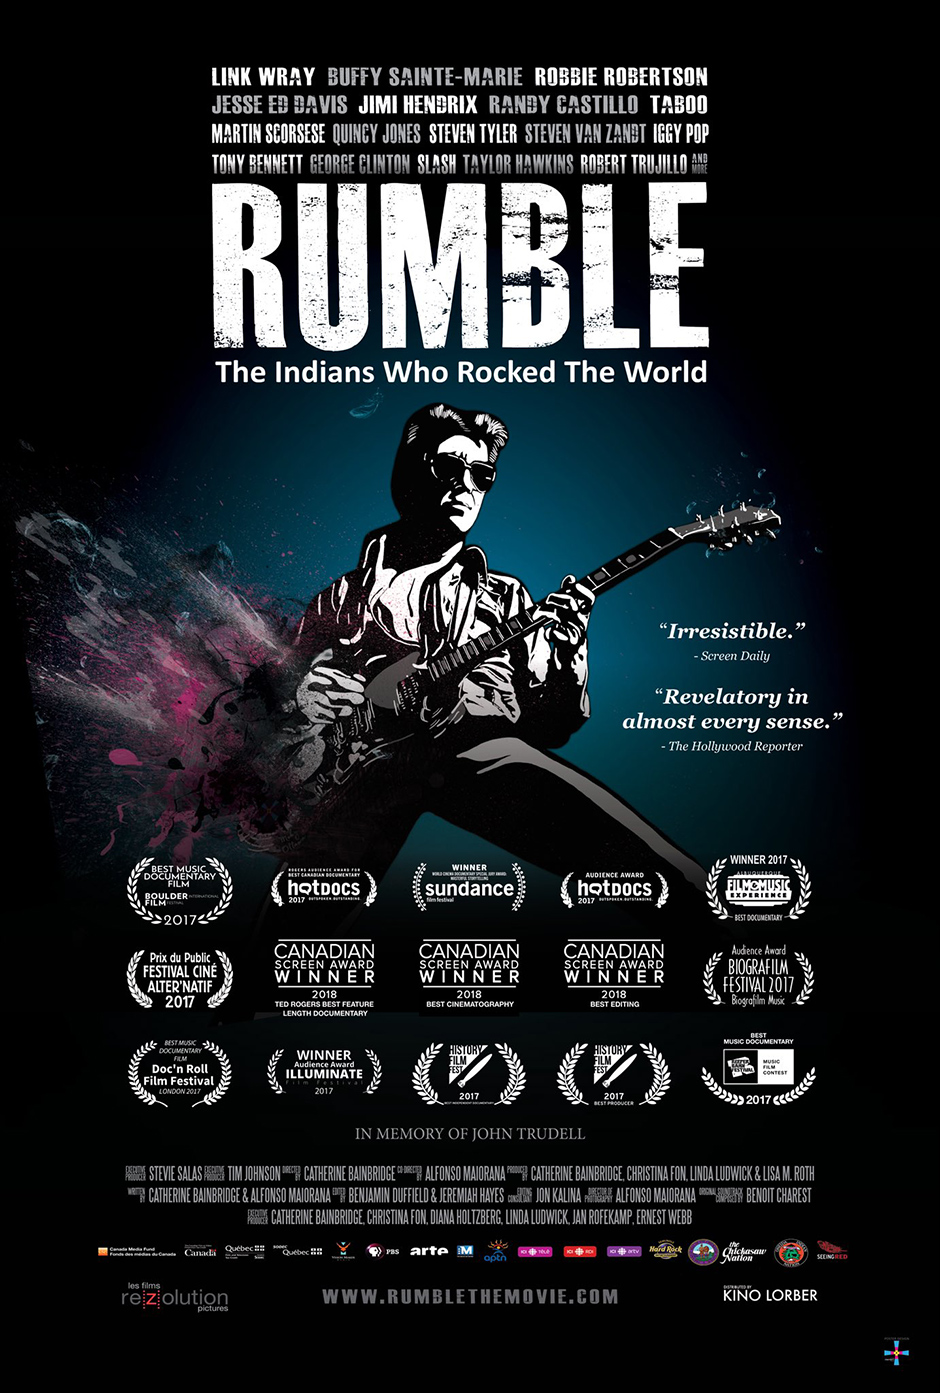 RUMBLE: THE INDIANS WHO ROCKED THE WORLD (2017)